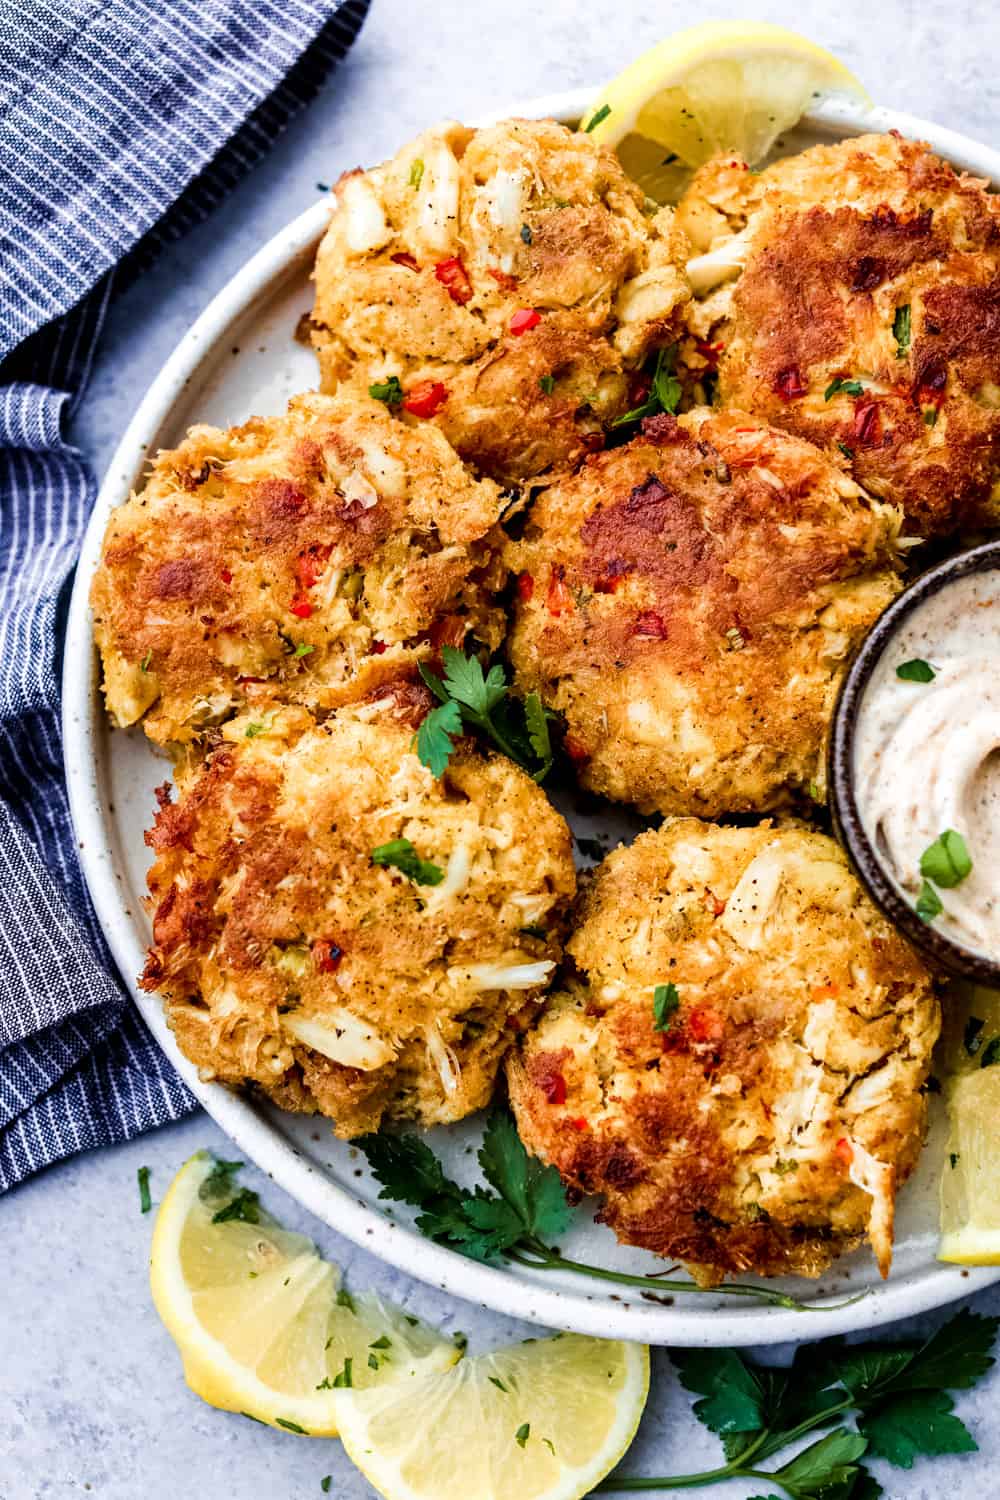 Crab cakes on a plate